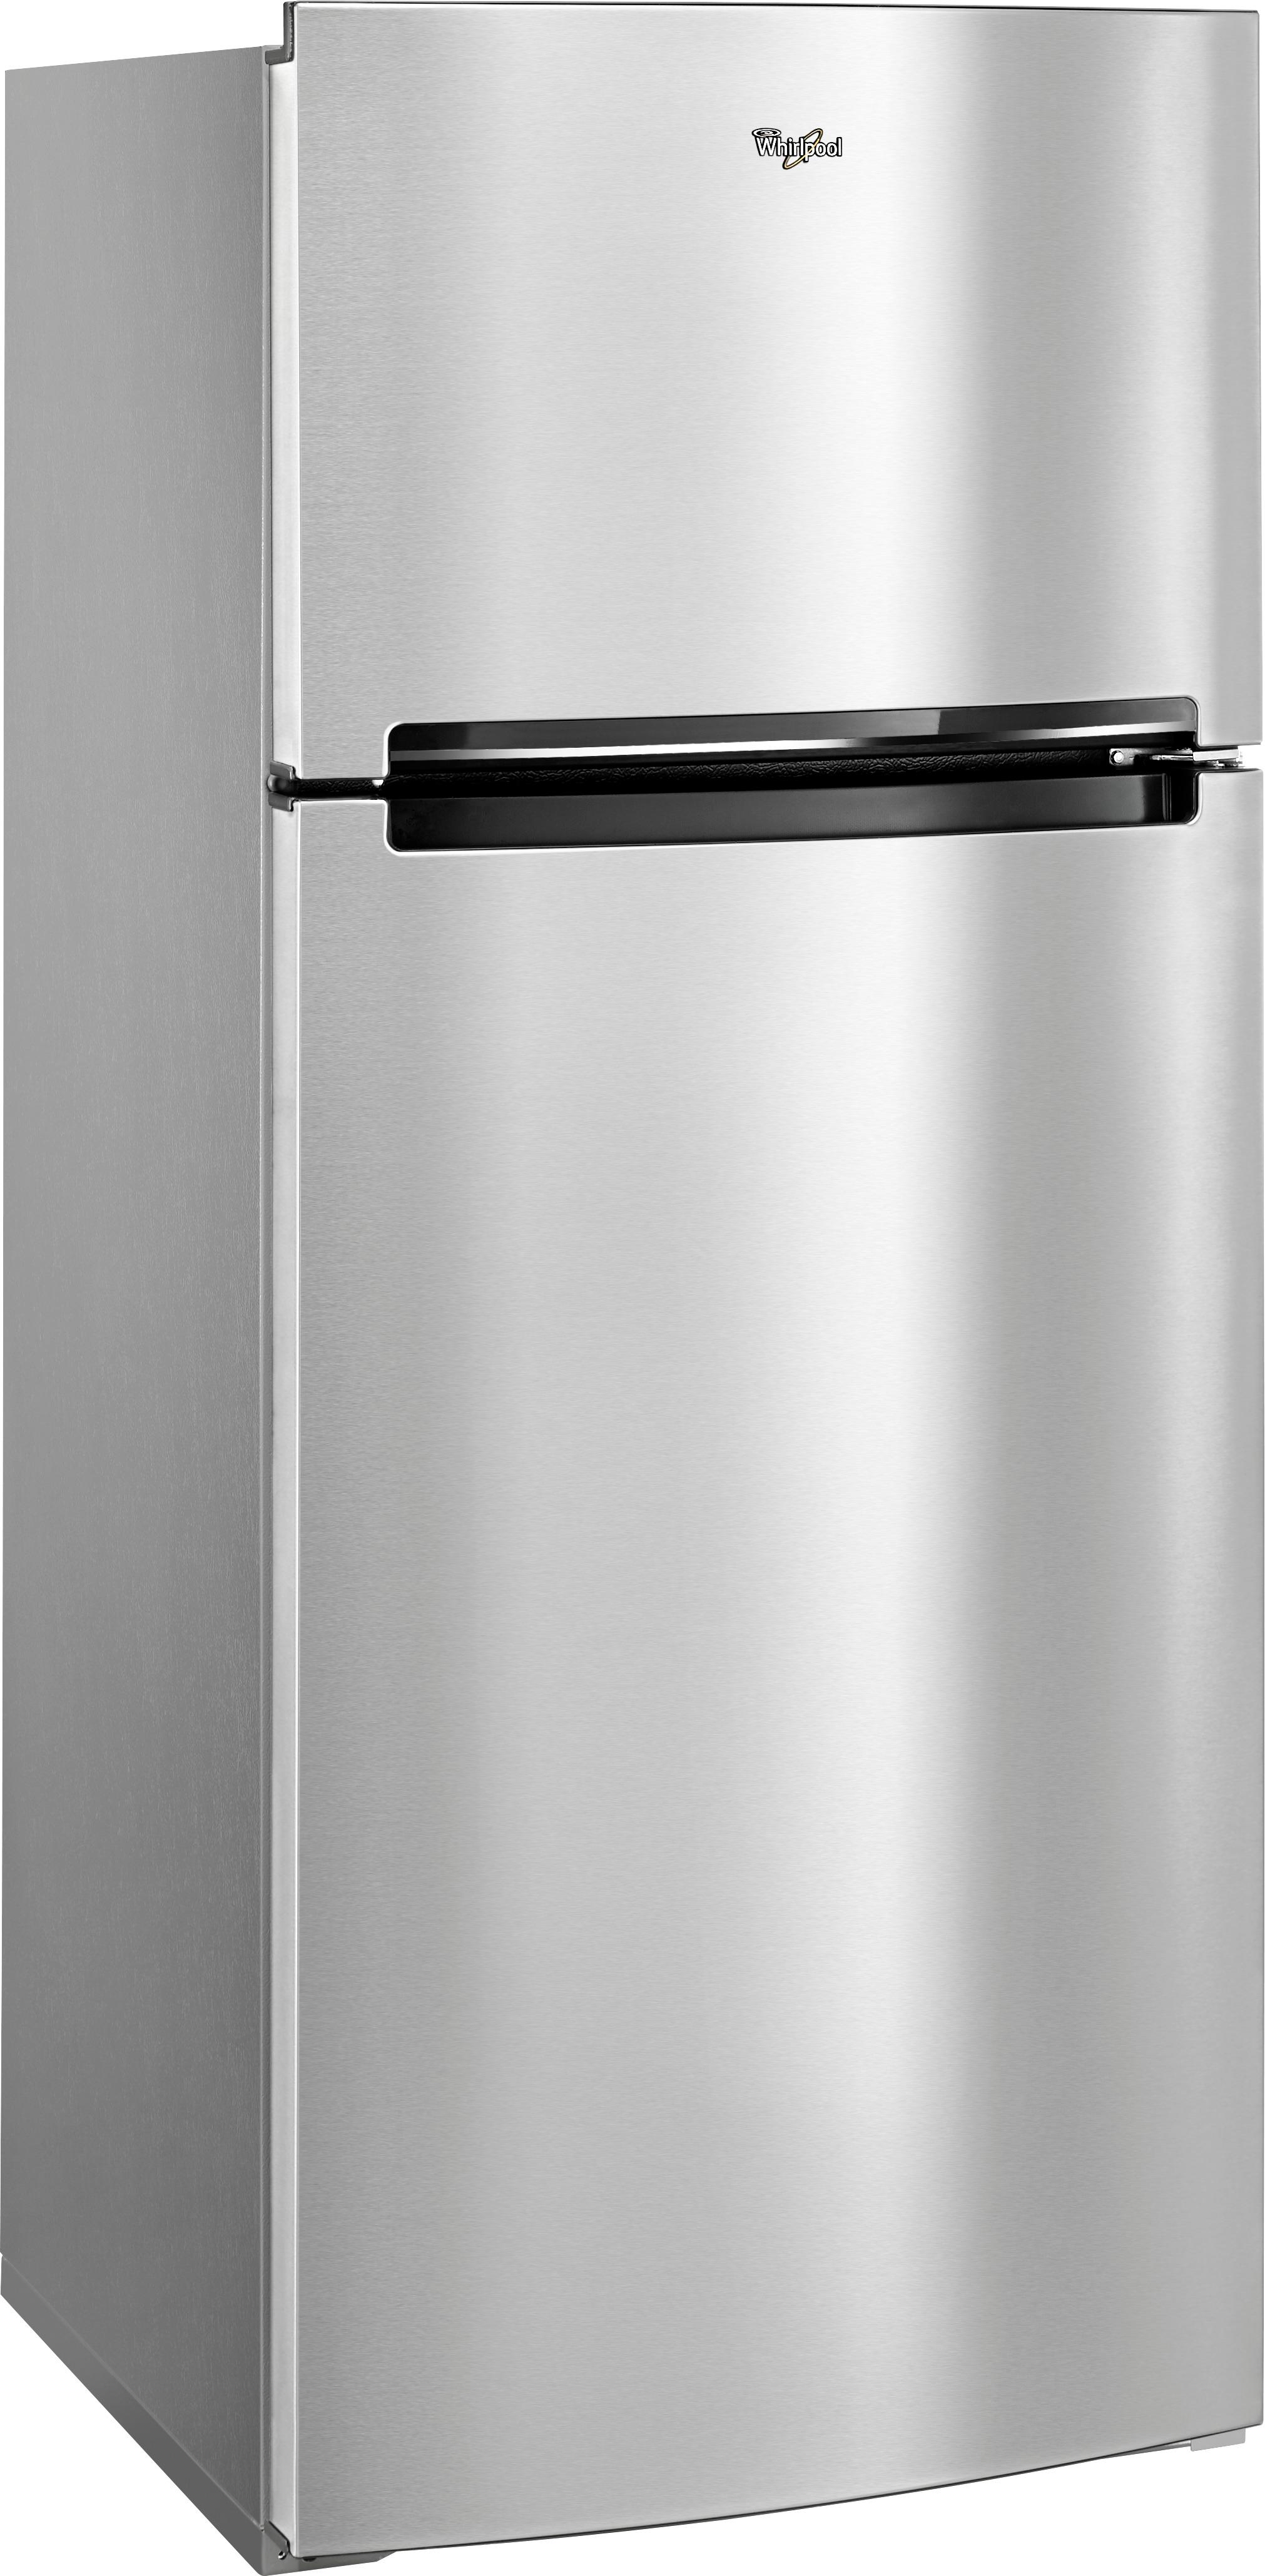 Angle View: Whirlpool - 17.6 Cu. Ft. Top-Freezer  Fingerprint Resistant Refrigerator - Stainless Steel